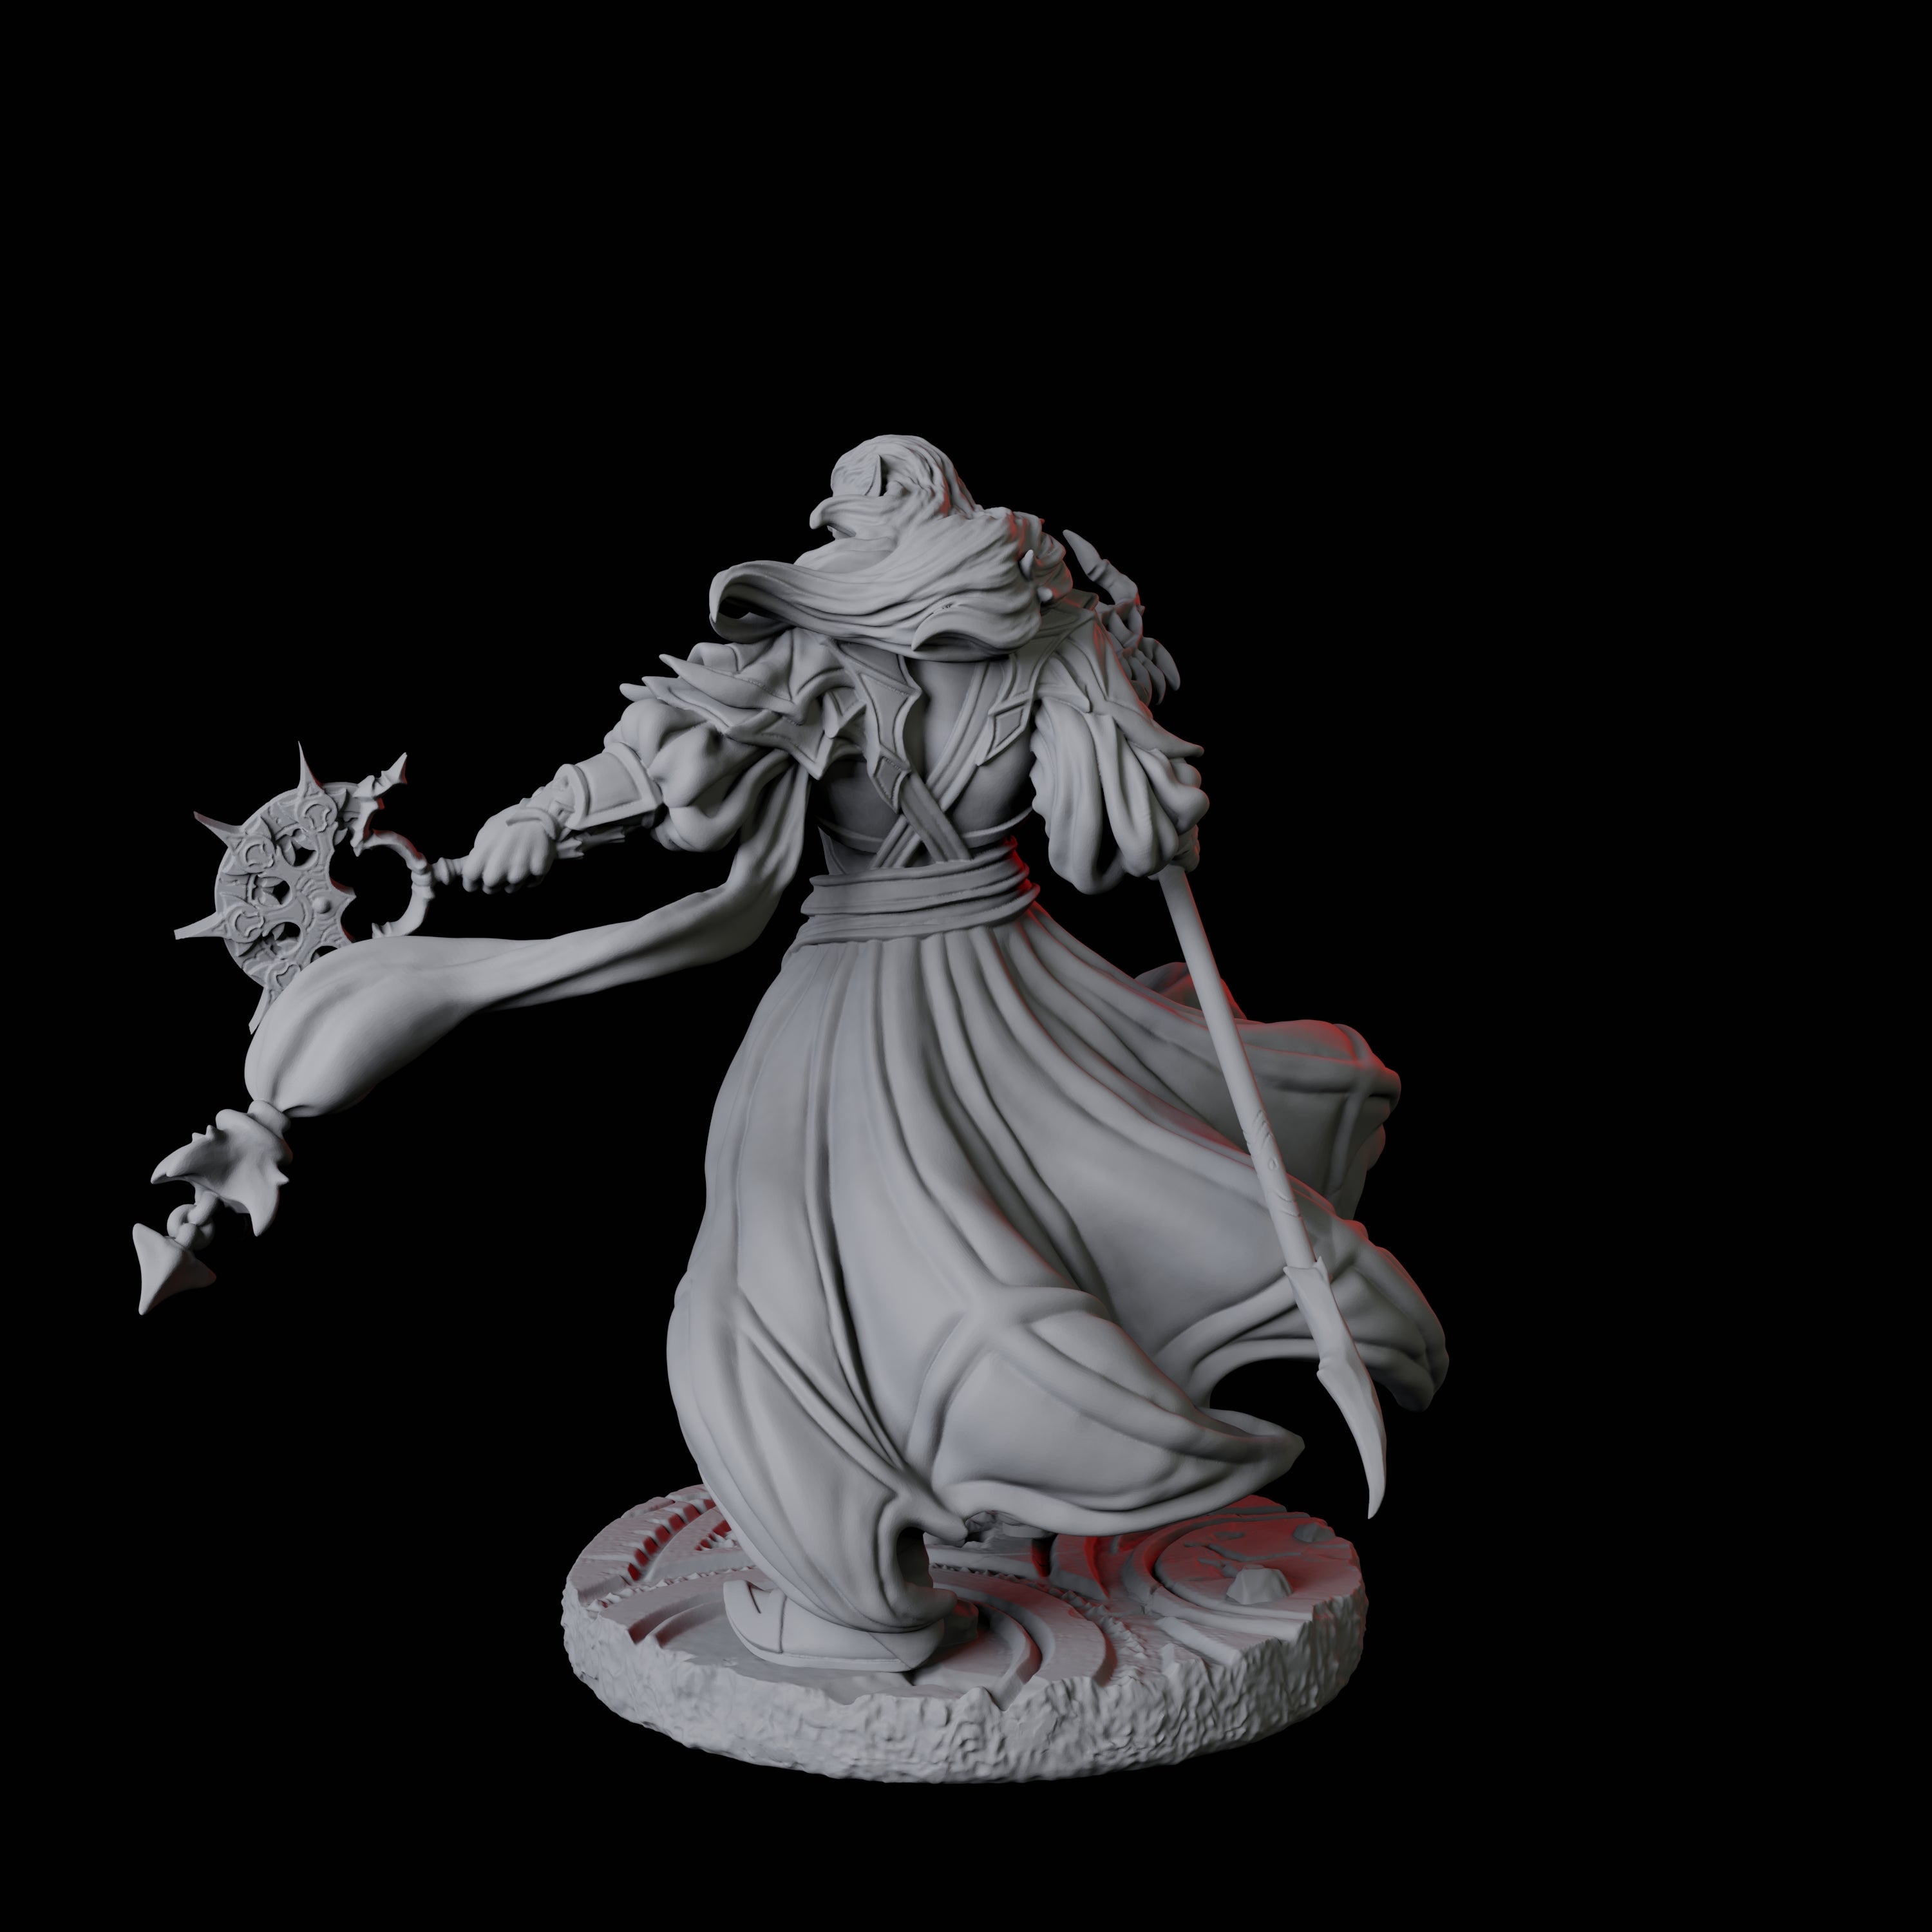 Proud Cleric B Miniature for Dungeons and Dragons, Pathfinder or other TTRPGs